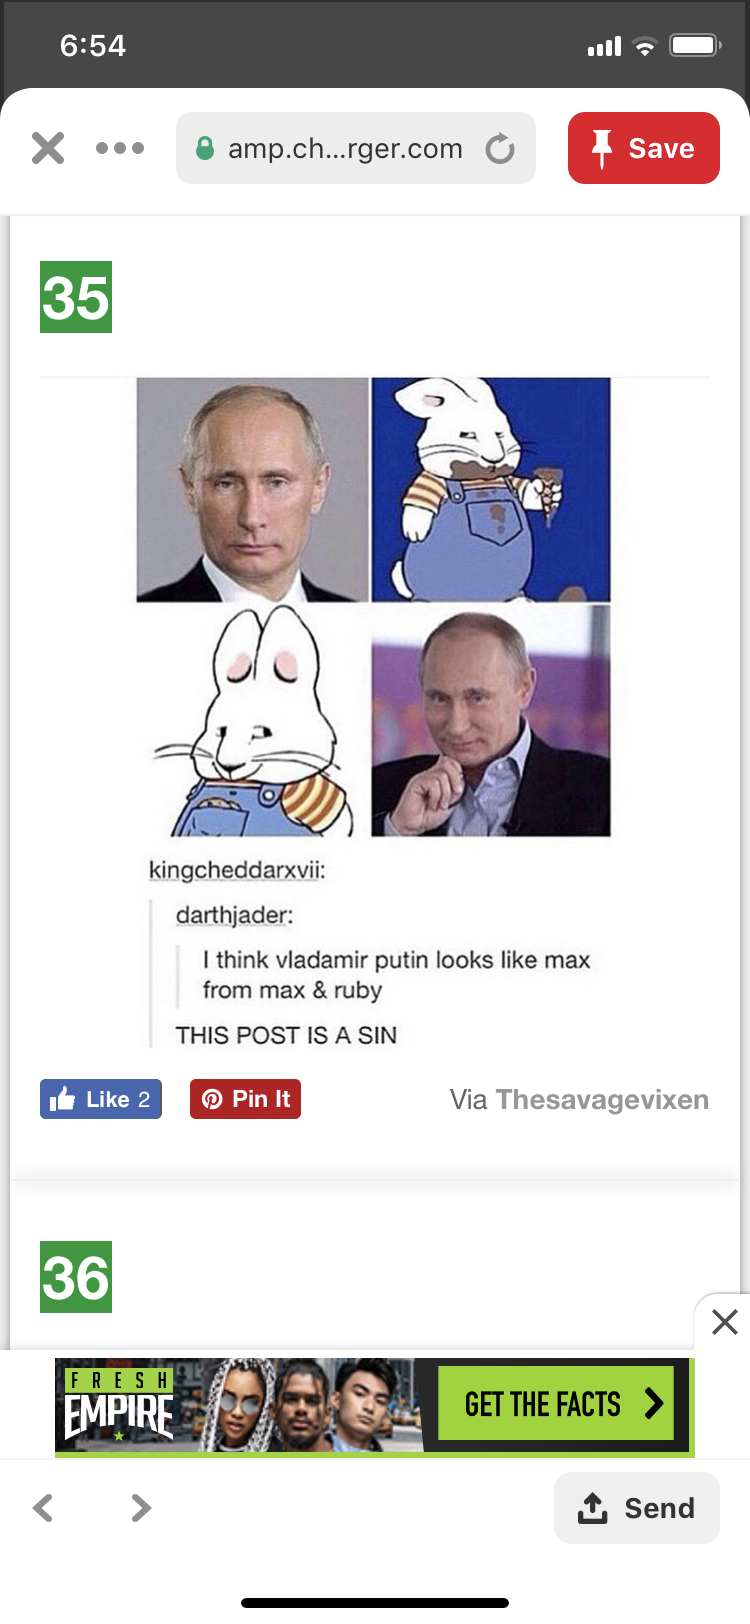 putin tumblr funny - X a mp.ch...rger.com Save 35 kingcheddarxit darthiader I think wiadamir putin looks max from max & ruby This Post Is A Sin La 2 Pint Via Thesivagevixen 36 Empre Obe. Se He facts > Send